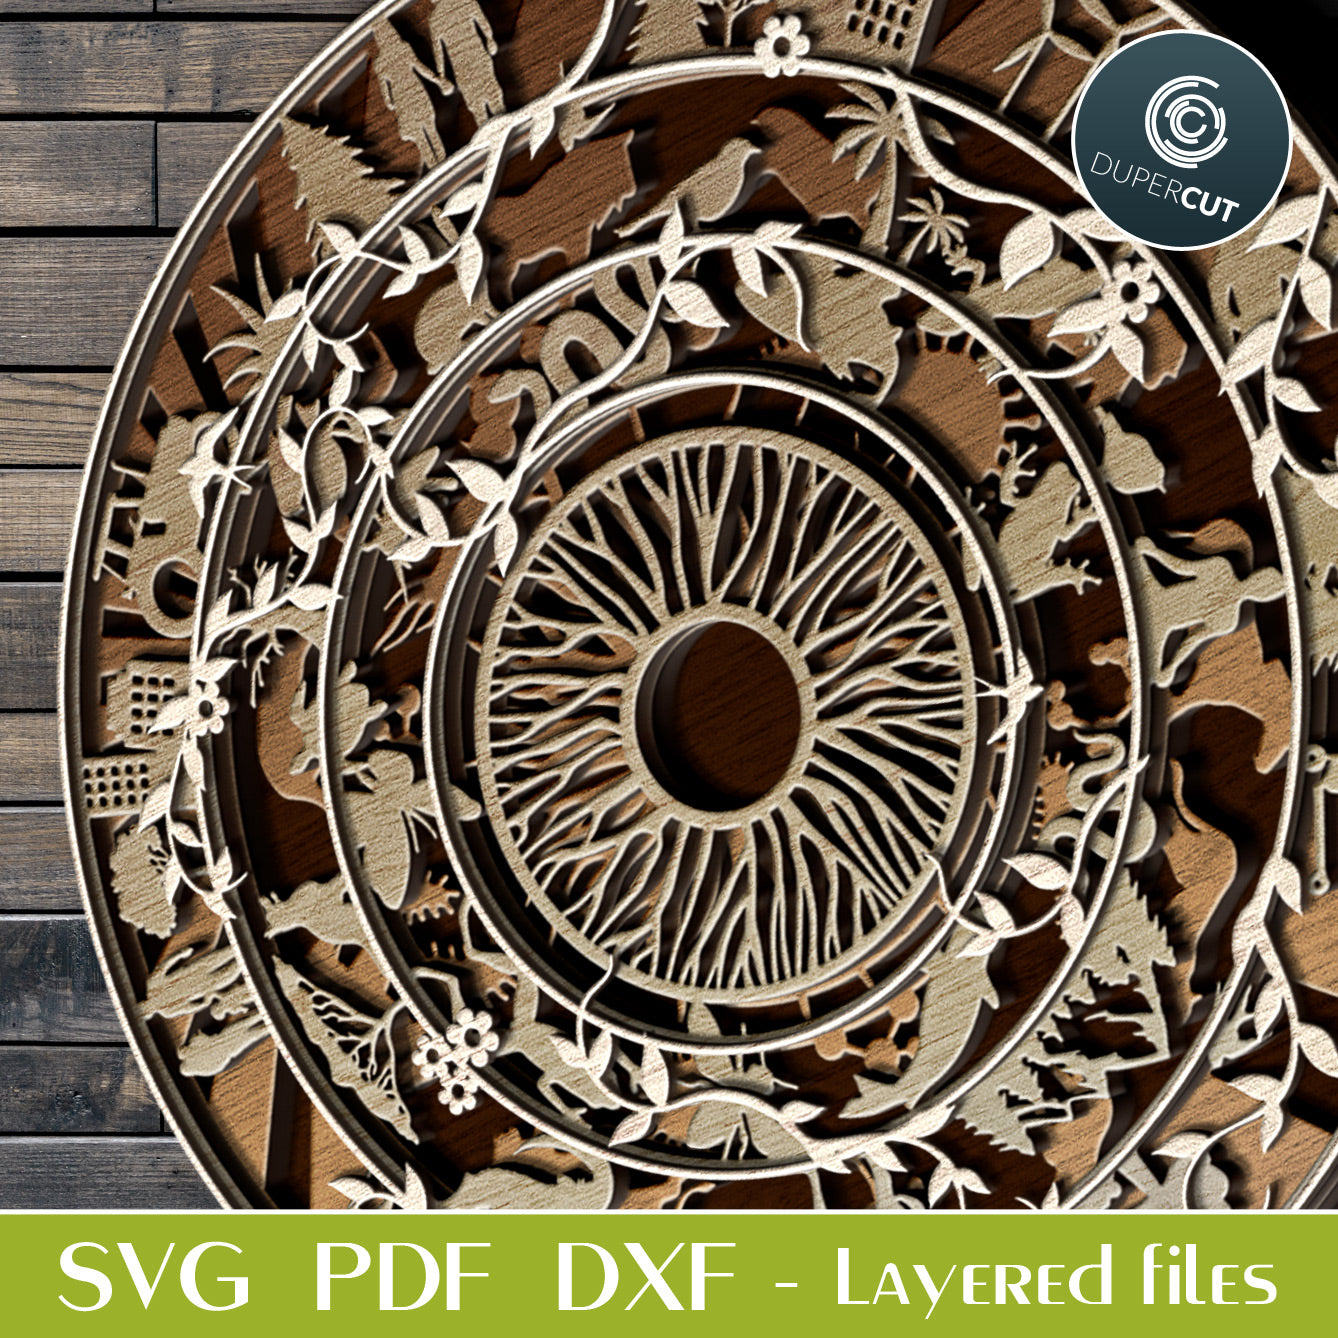 Eye of the earth, Abstract design - layered cutting files - SVG PDF DXF vector template for laser machines Glowforge, Cricut, Silhouette, CNC Plasma